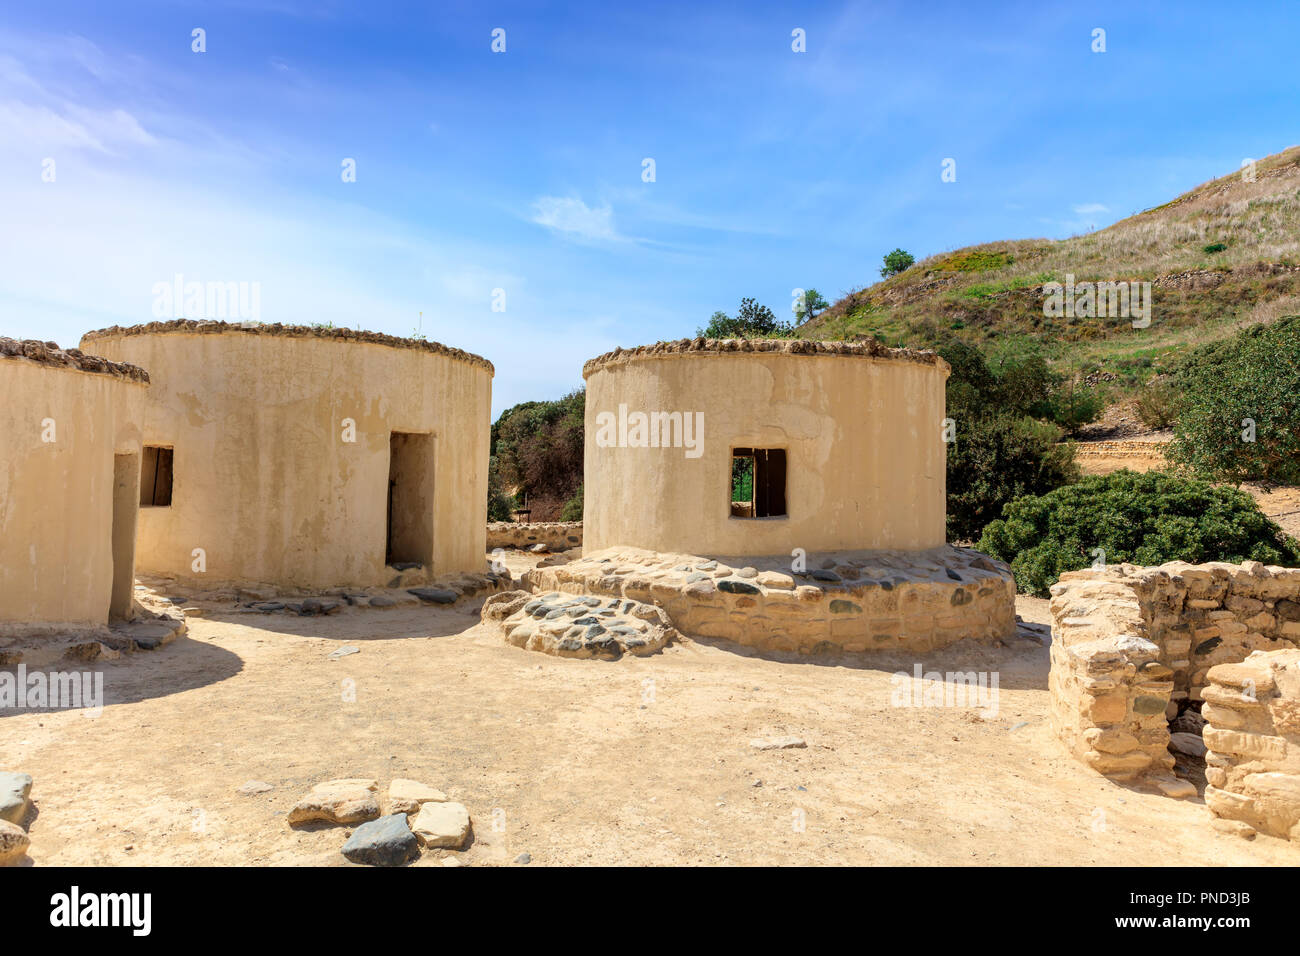 The Neolithic settlement of Choirokoitia, occupied from the 7th to the 4th millennium B.C. in Cyprus. Stock Photo